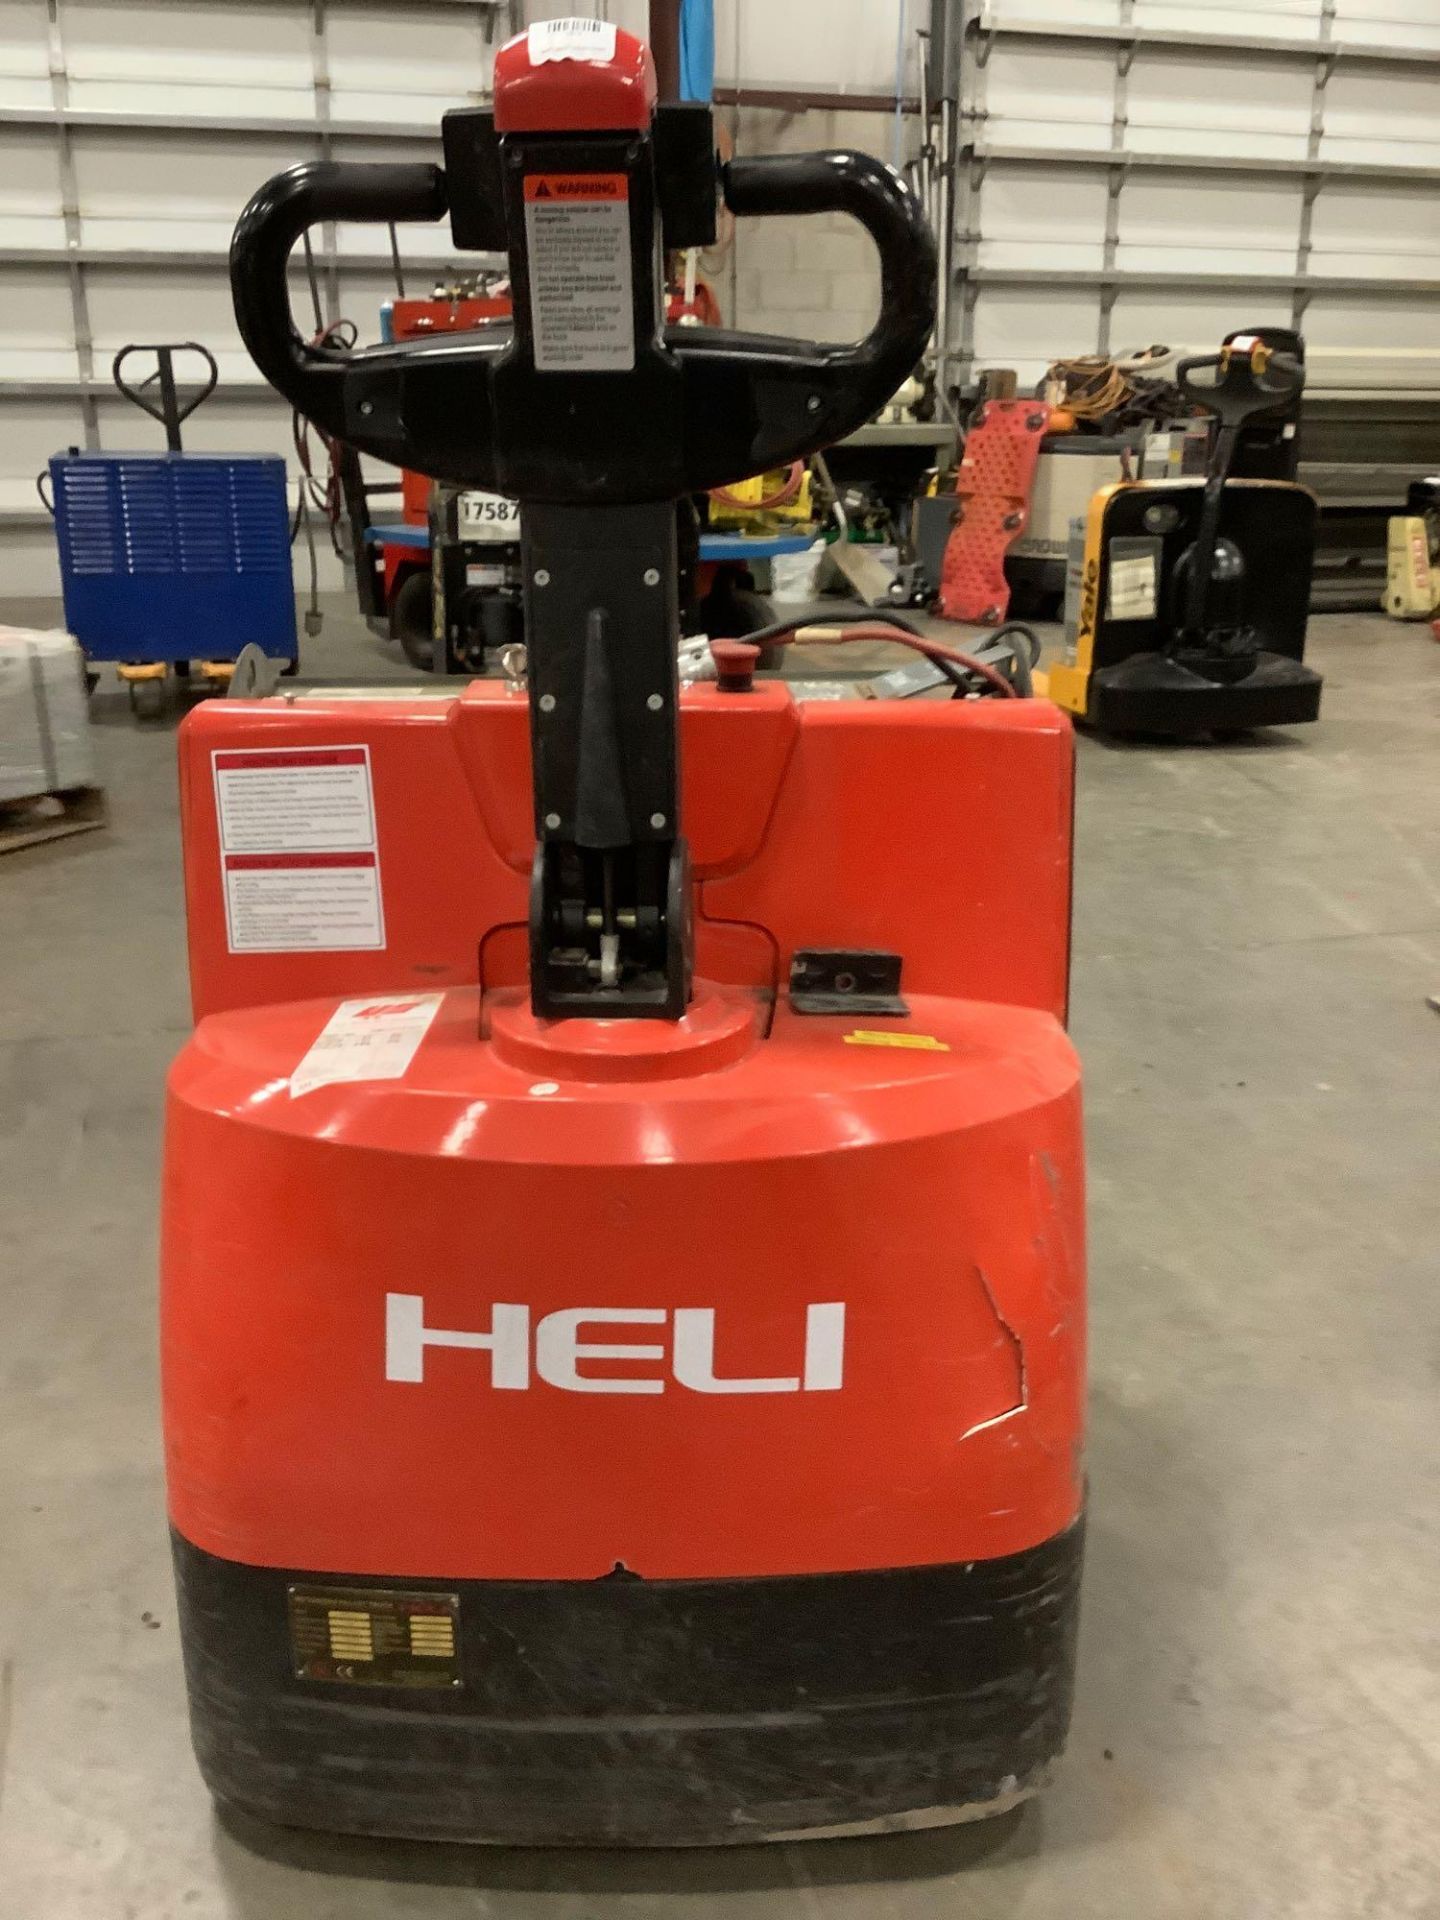 HELI PALLET JACK MODEL CBD20, ELECTRIC, APPROX MAX CAPACITY 4400, ELECTRICAL ISSUE, CONDITION UNKNOW - Image 8 of 9